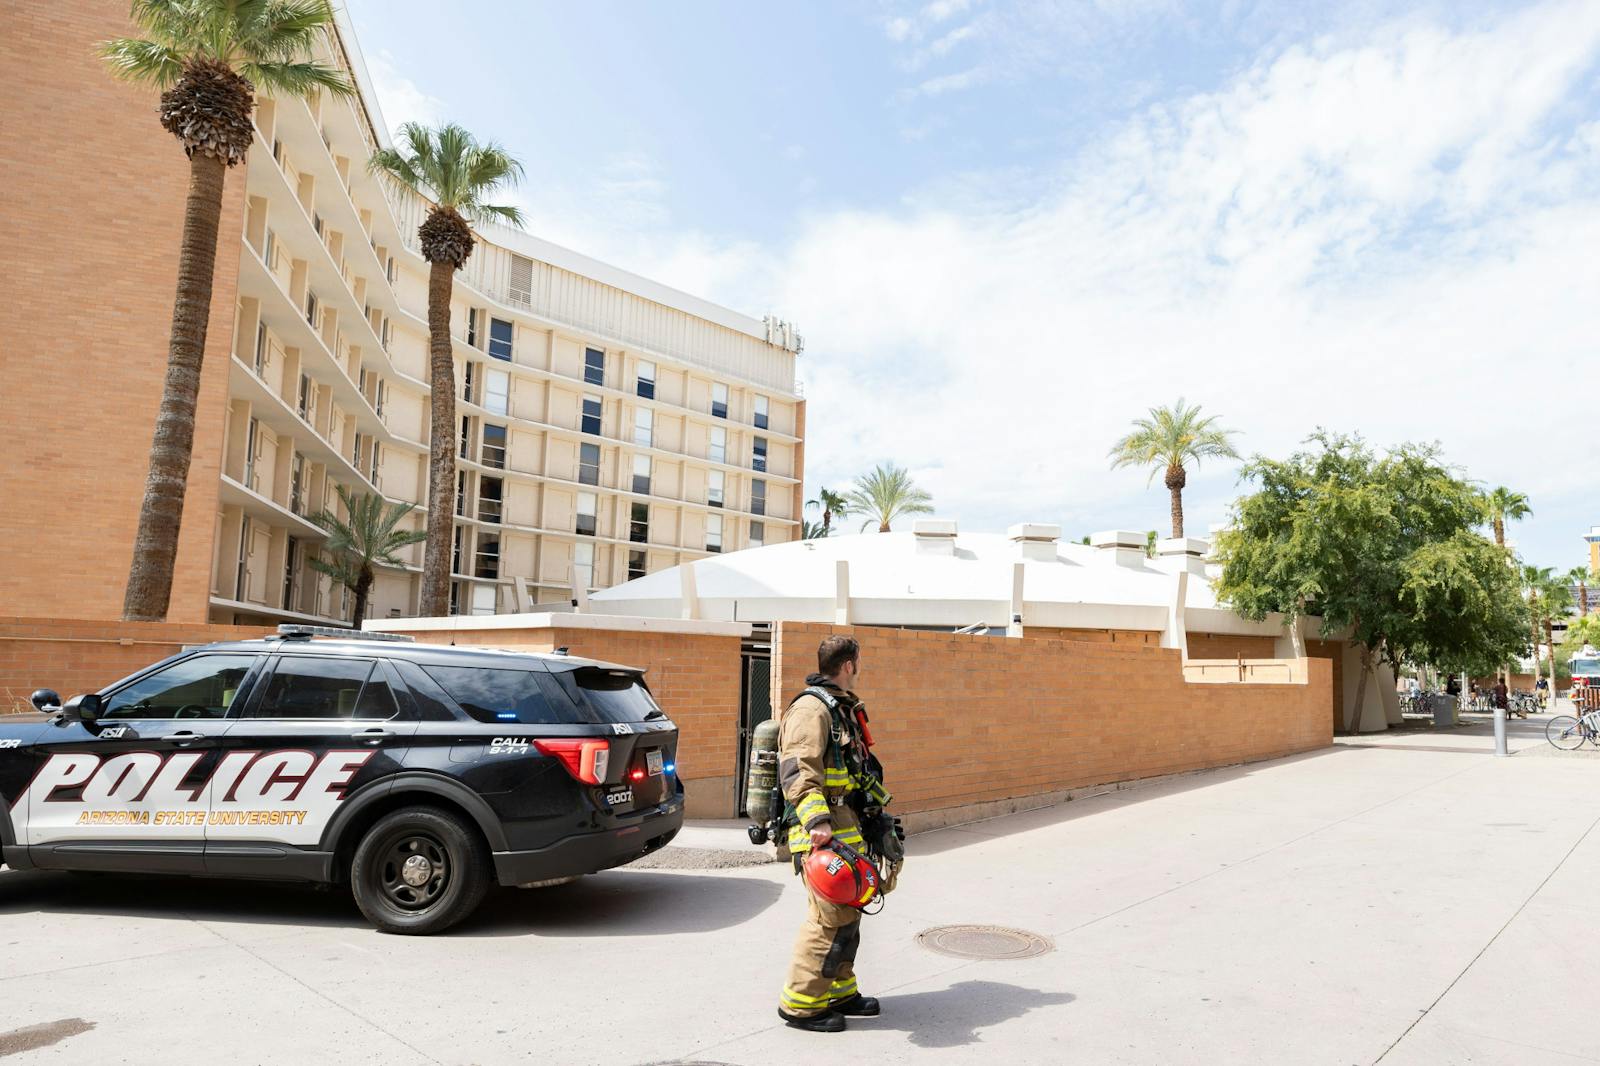 ASU students displaced following fire at dorm in Tempe